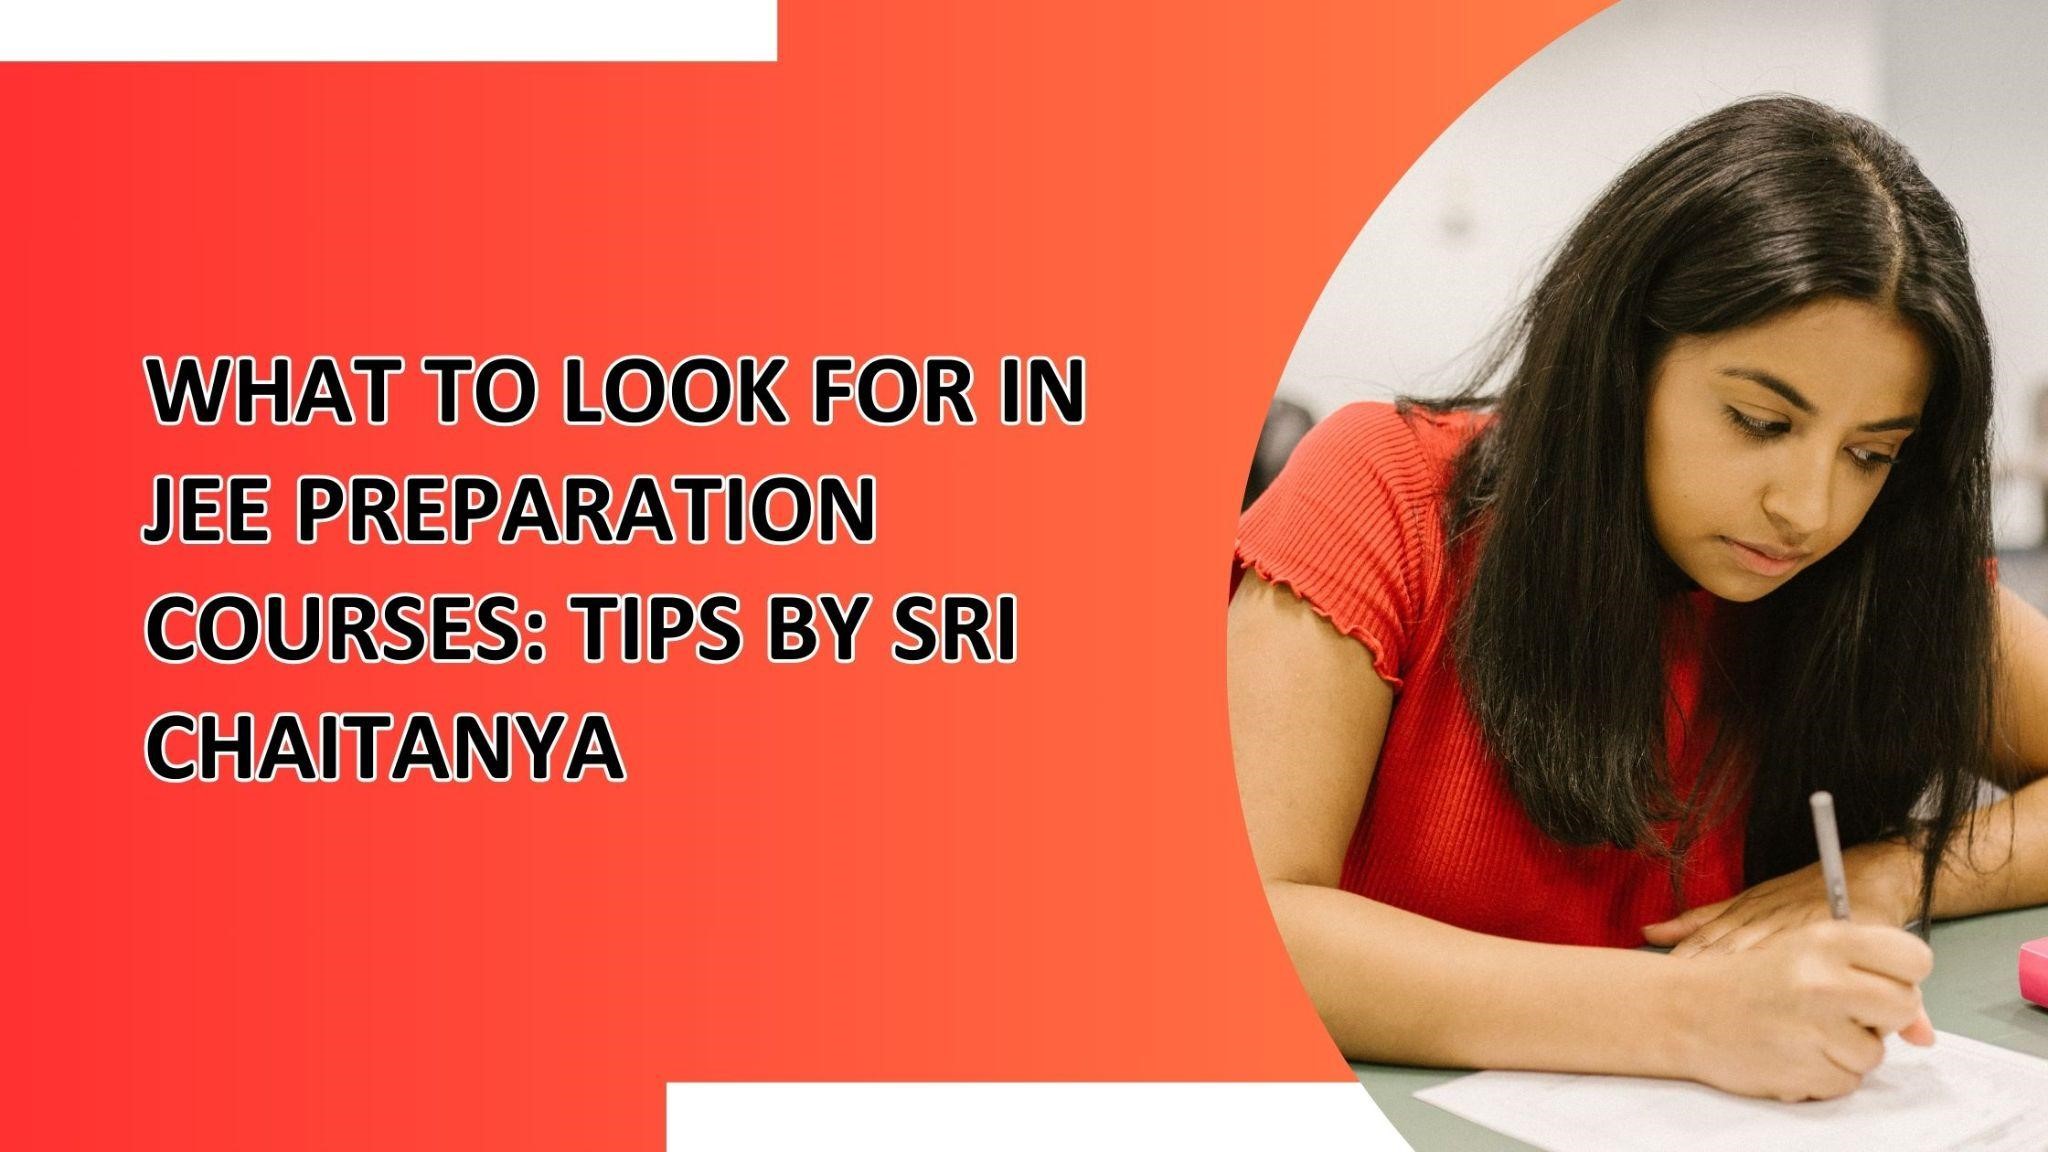 What to Look for in JEE Preparation Courses-Tips by Sri Chaitanya